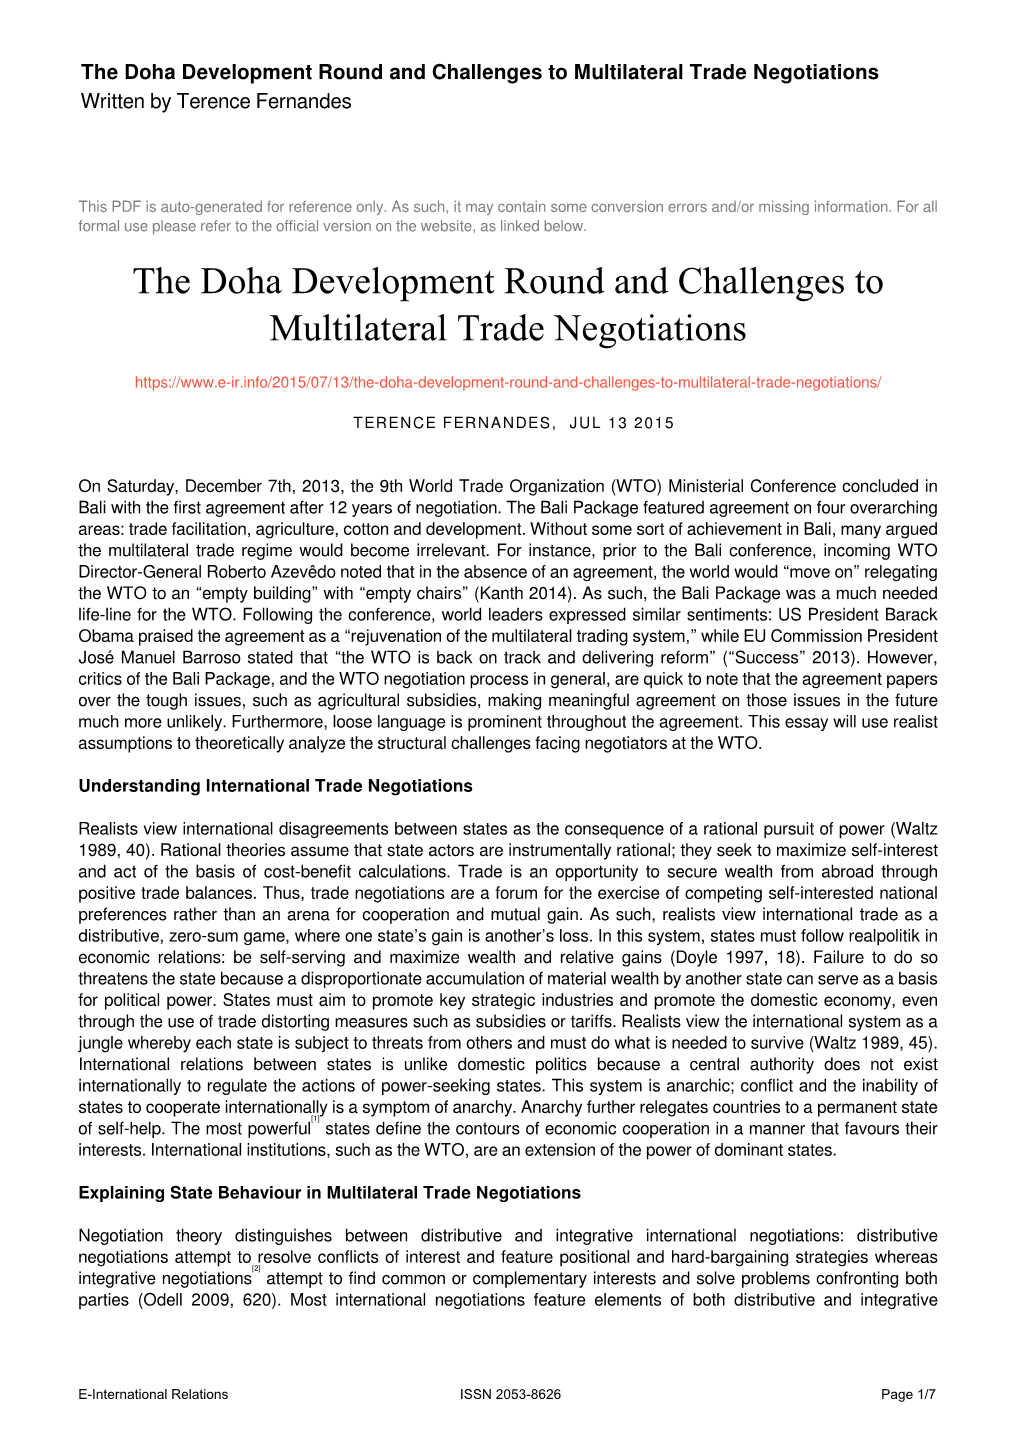 The Doha Development Round and Challenges to Multilateral Trade Negotiations Written by Terence Fernandes